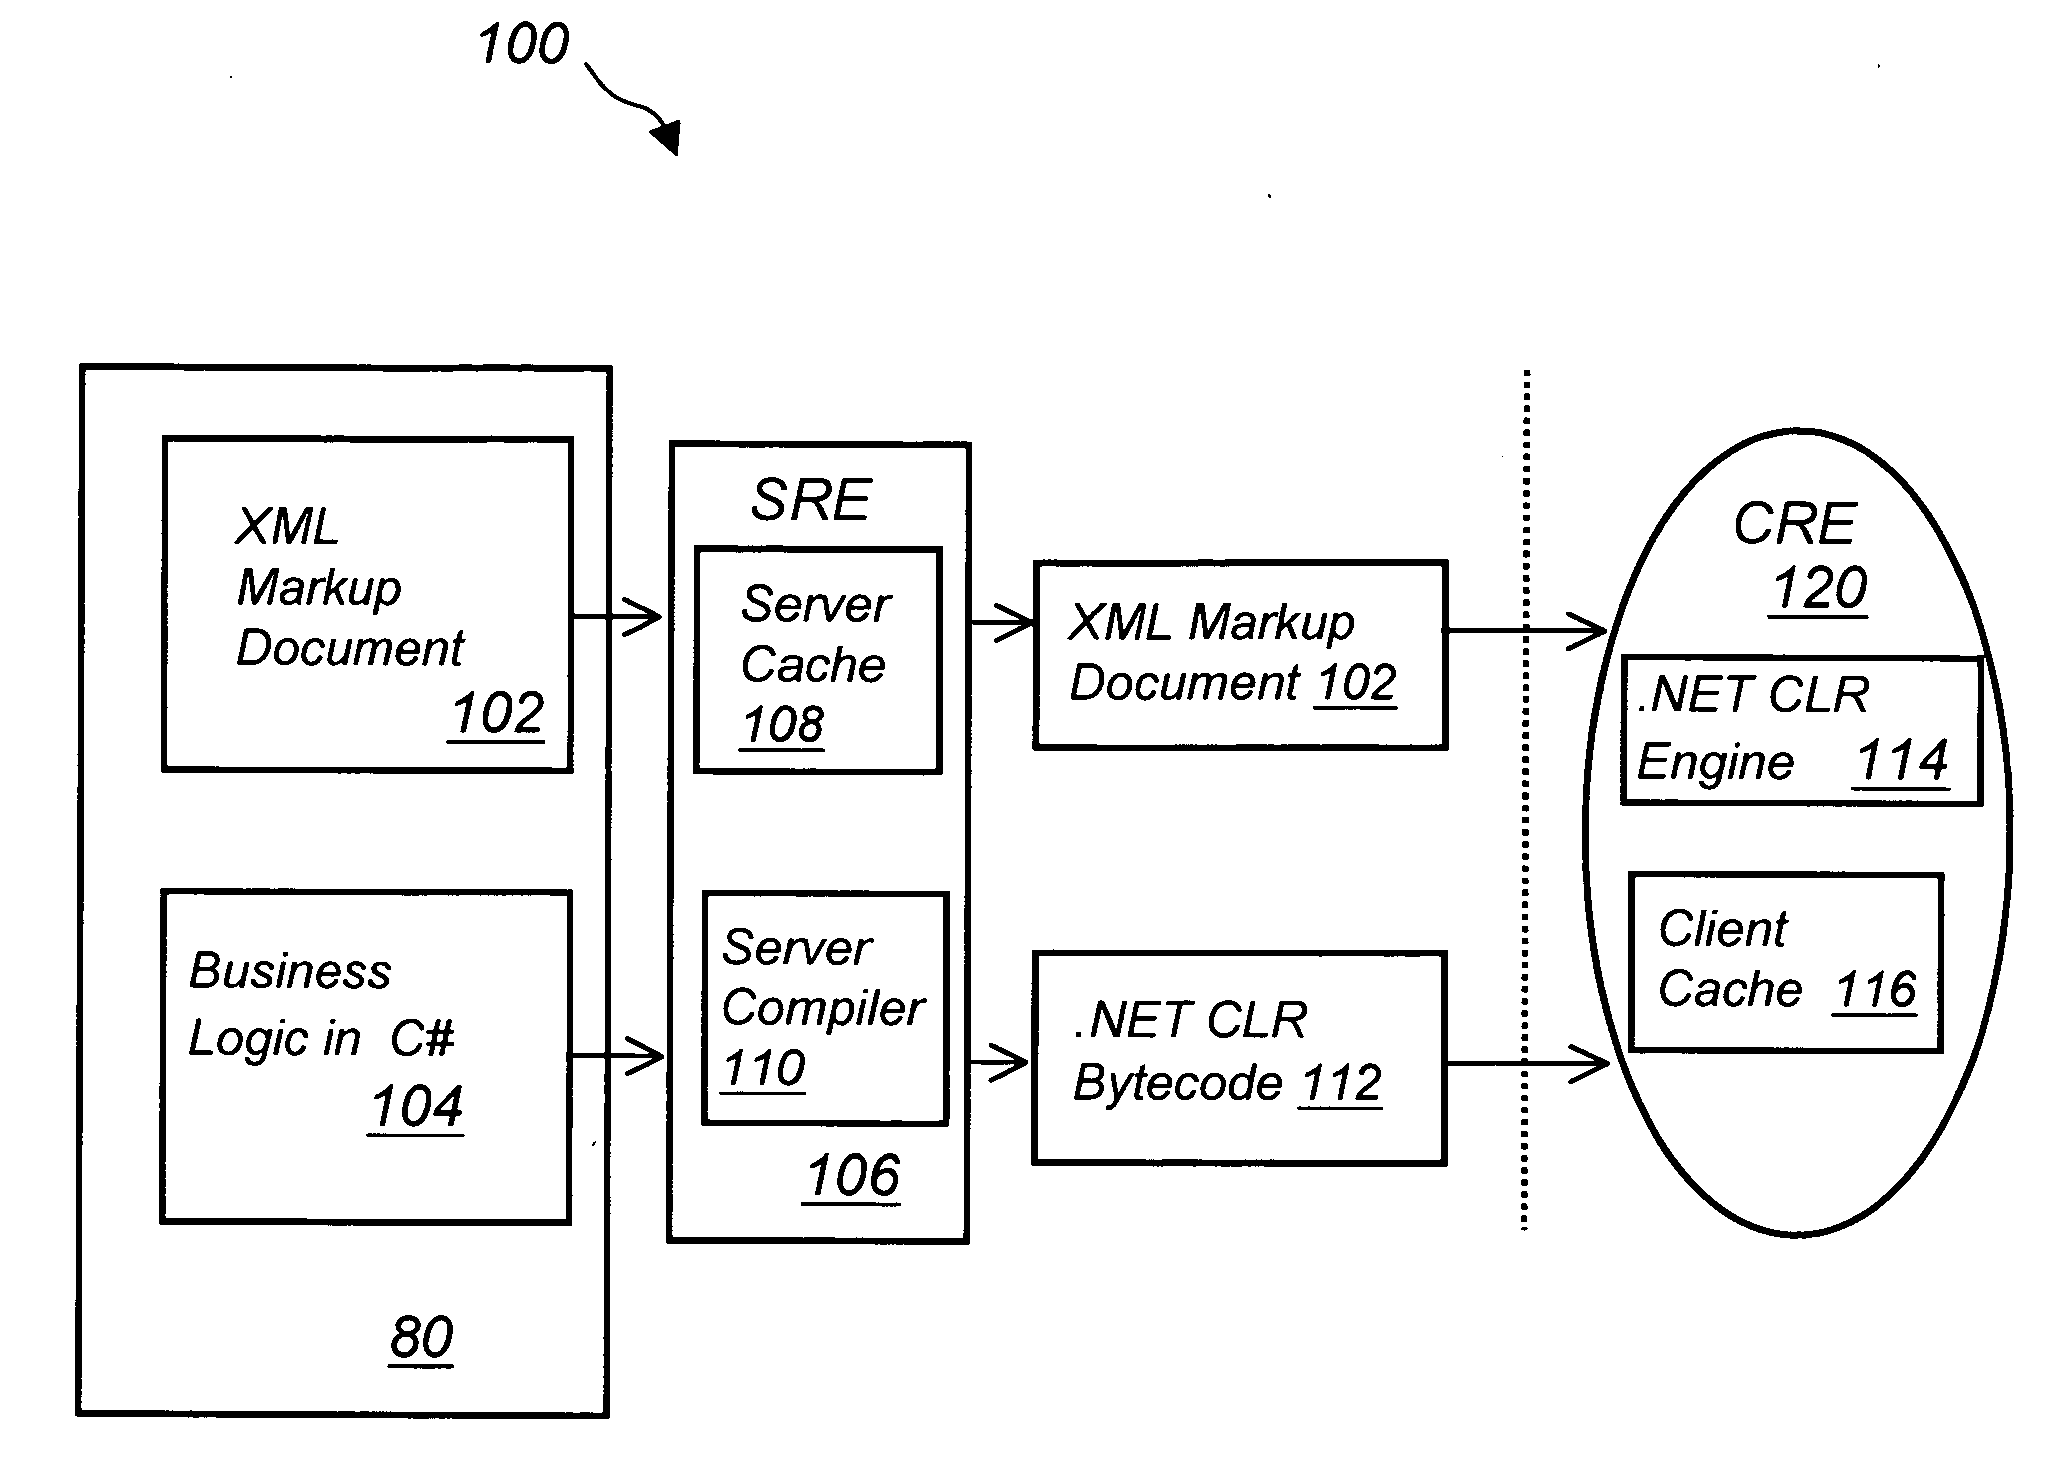 System and method for developing and deploying computer applications over a network